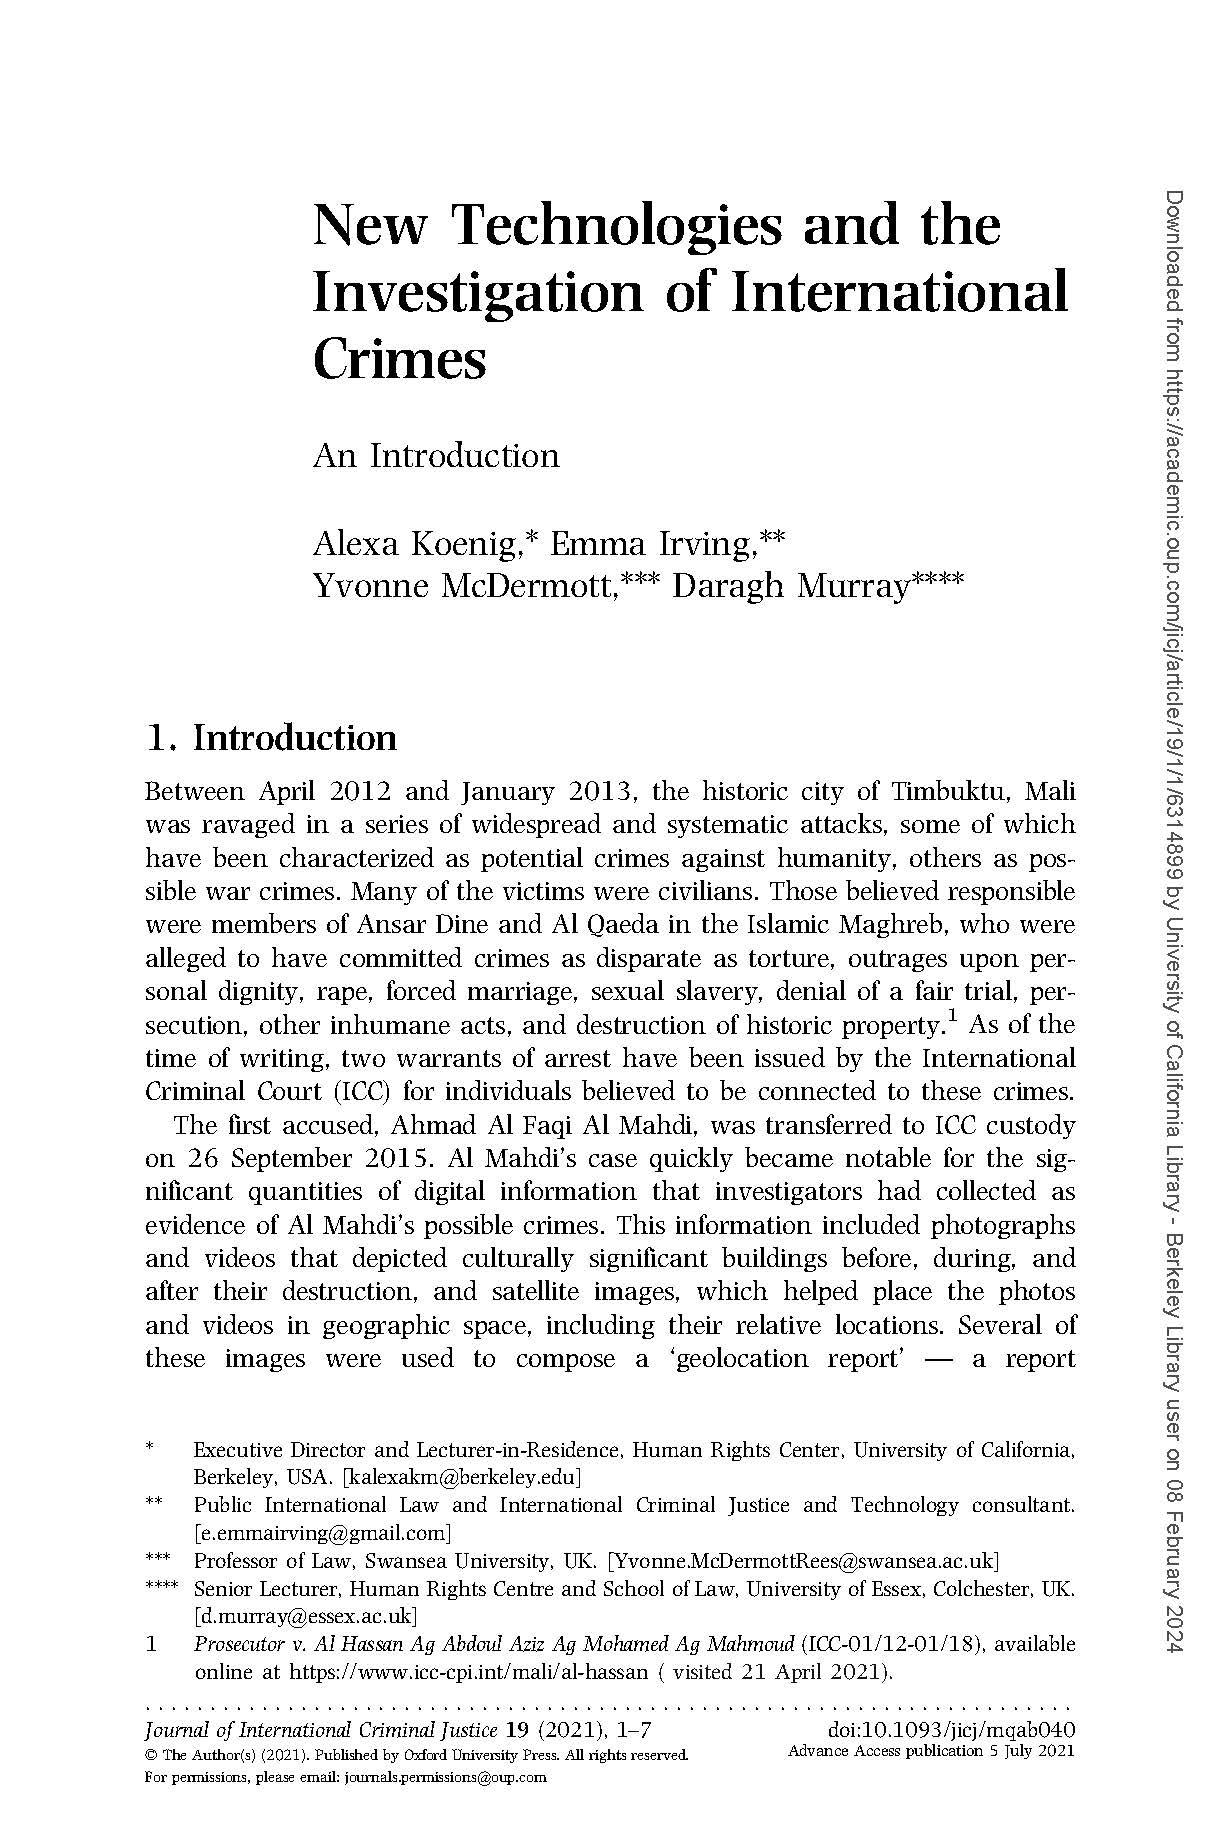 Pages from New Technologies and the Investigation of International Crimes- An Introduction